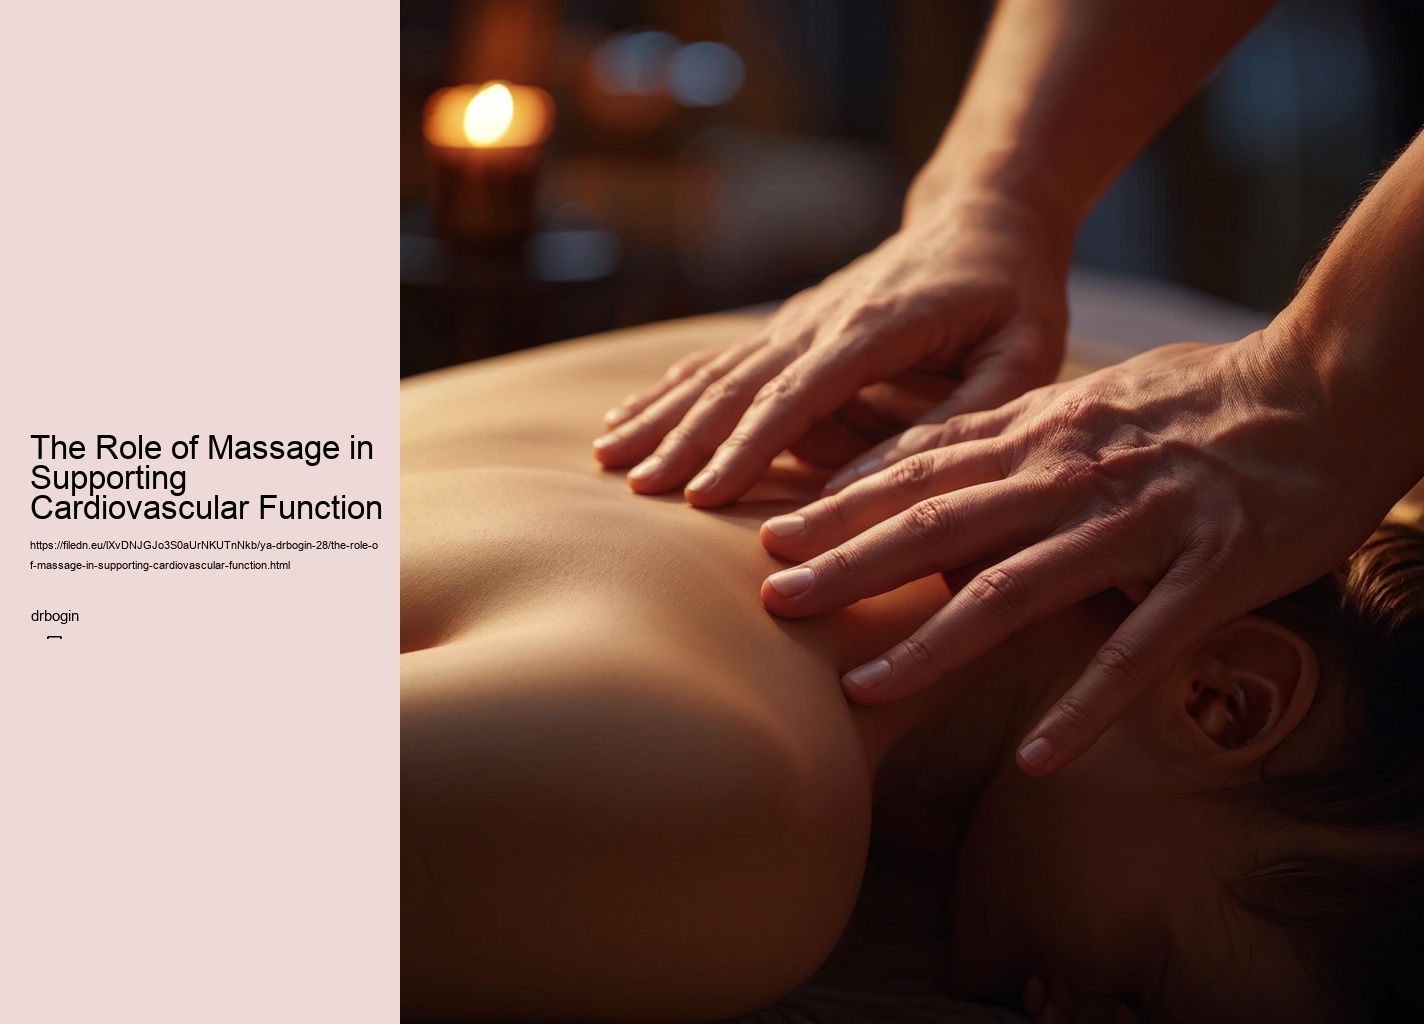 The Role of Massage in Supporting Cardiovascular Function